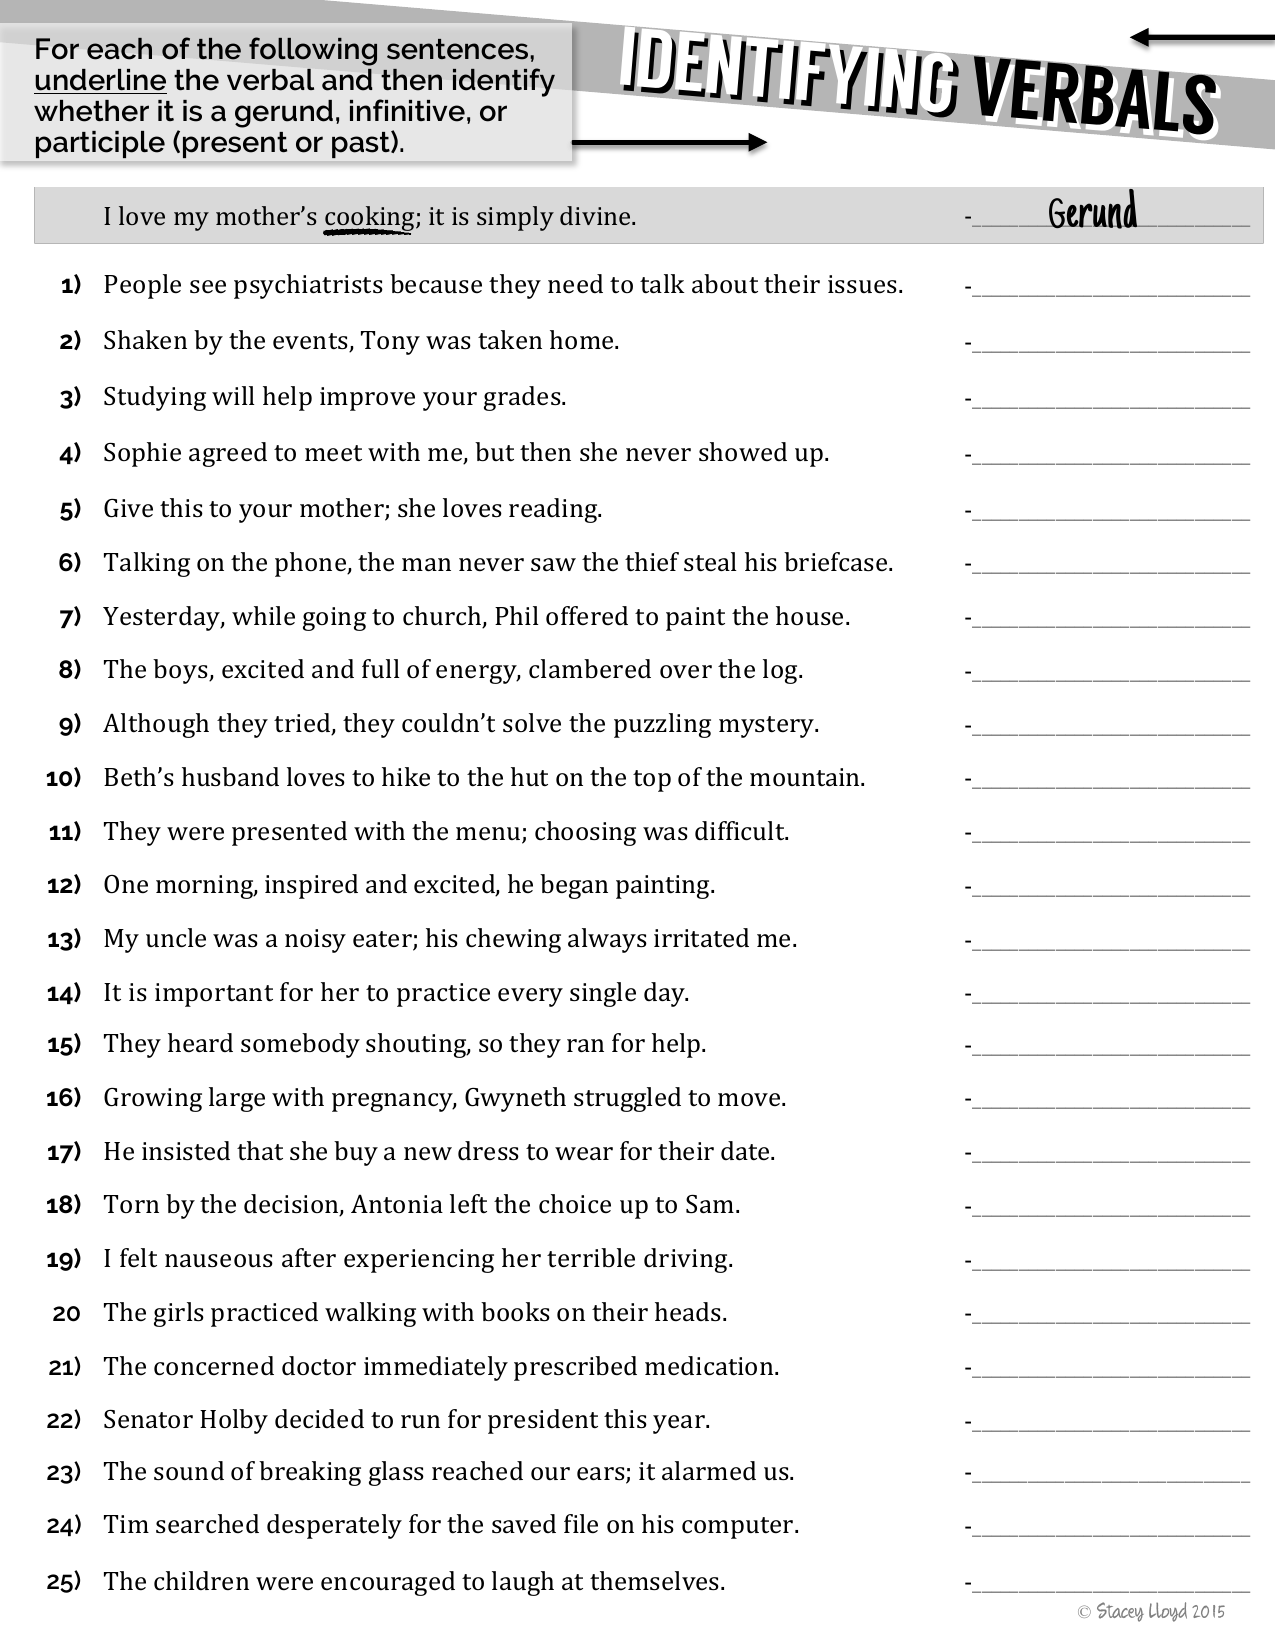 Worksheet 5 Identifying And Using Gerunds And Gerund Phrases